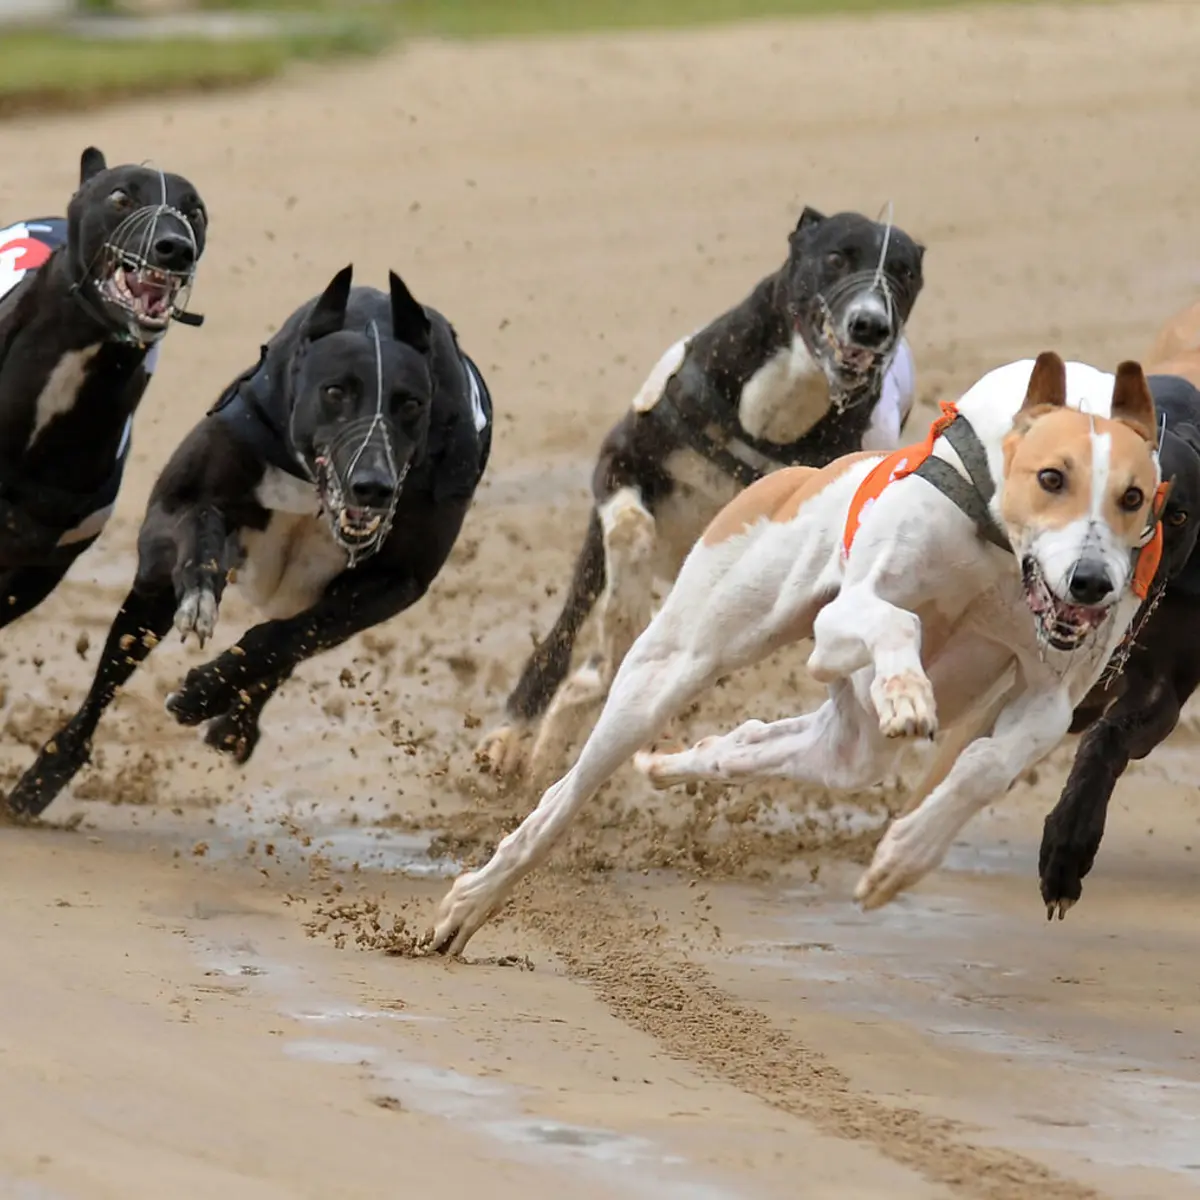 Crayford Crayford Race Tickets Party Packs- Saturday 17th June